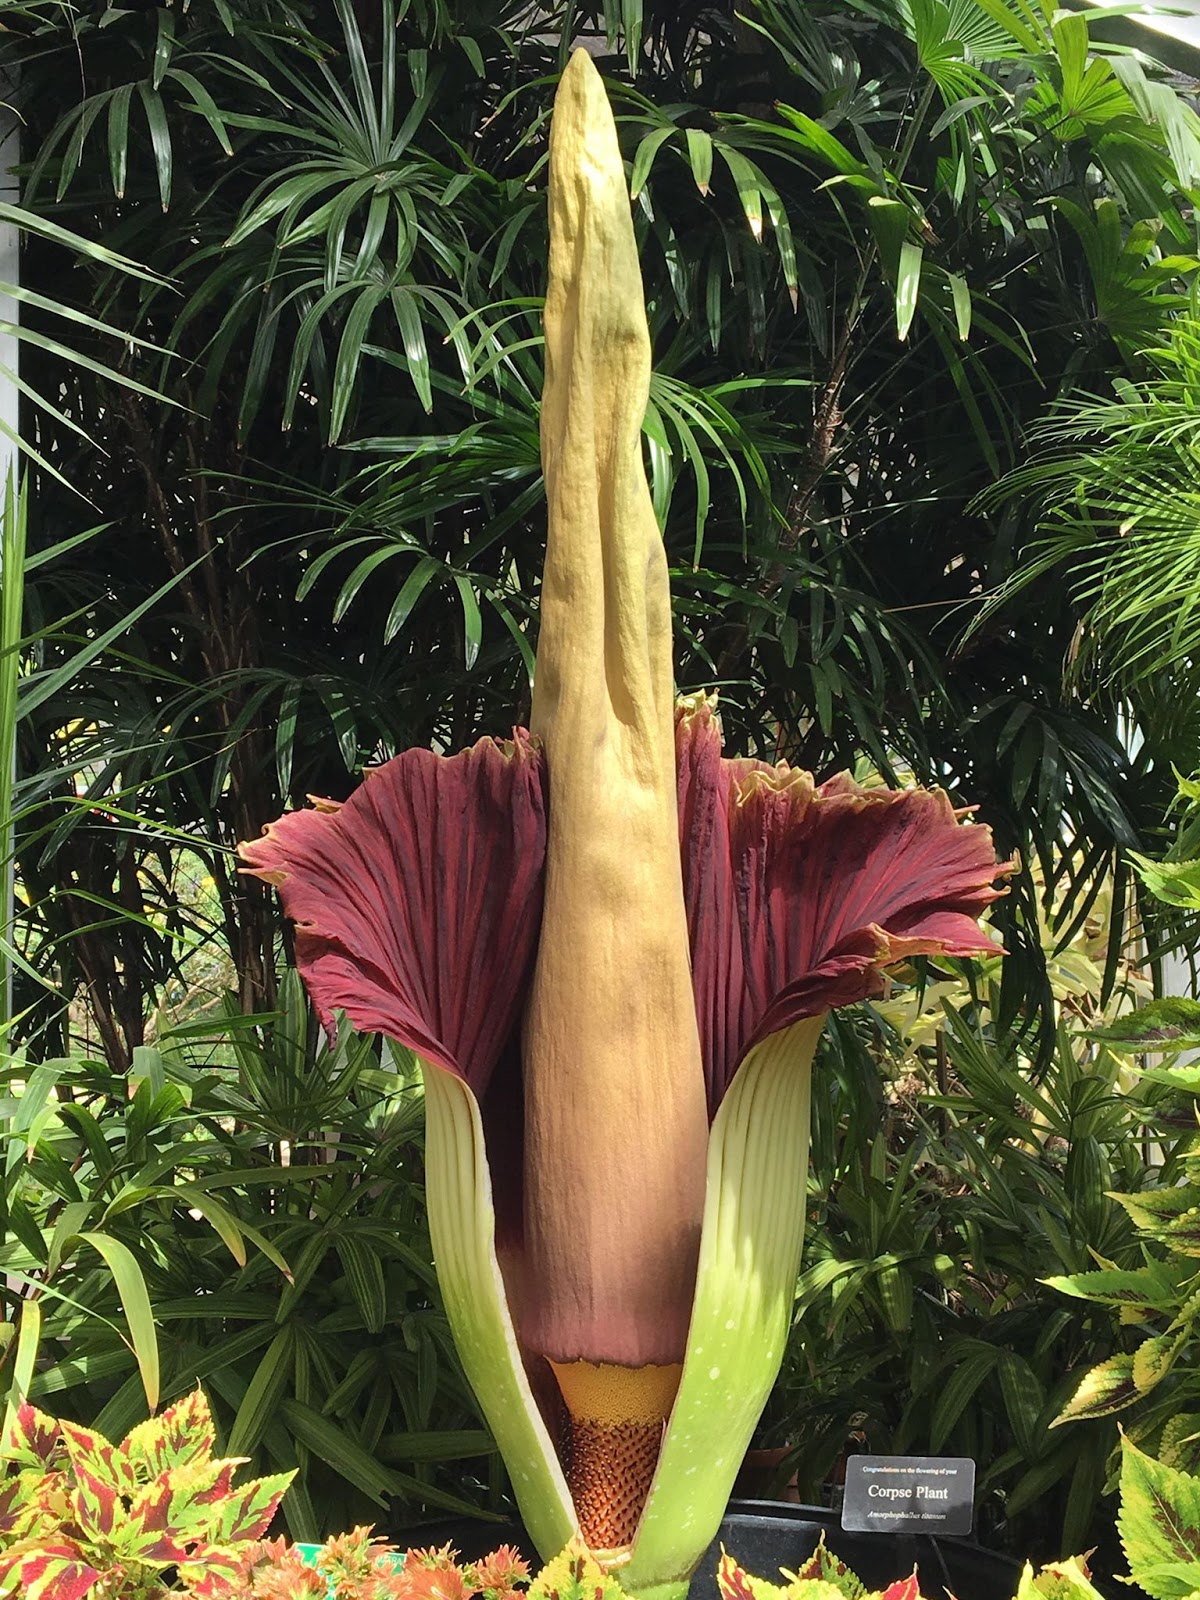 Aloha from Hawaii: The Rare, Giant corpse flower at Foster Botanical ...